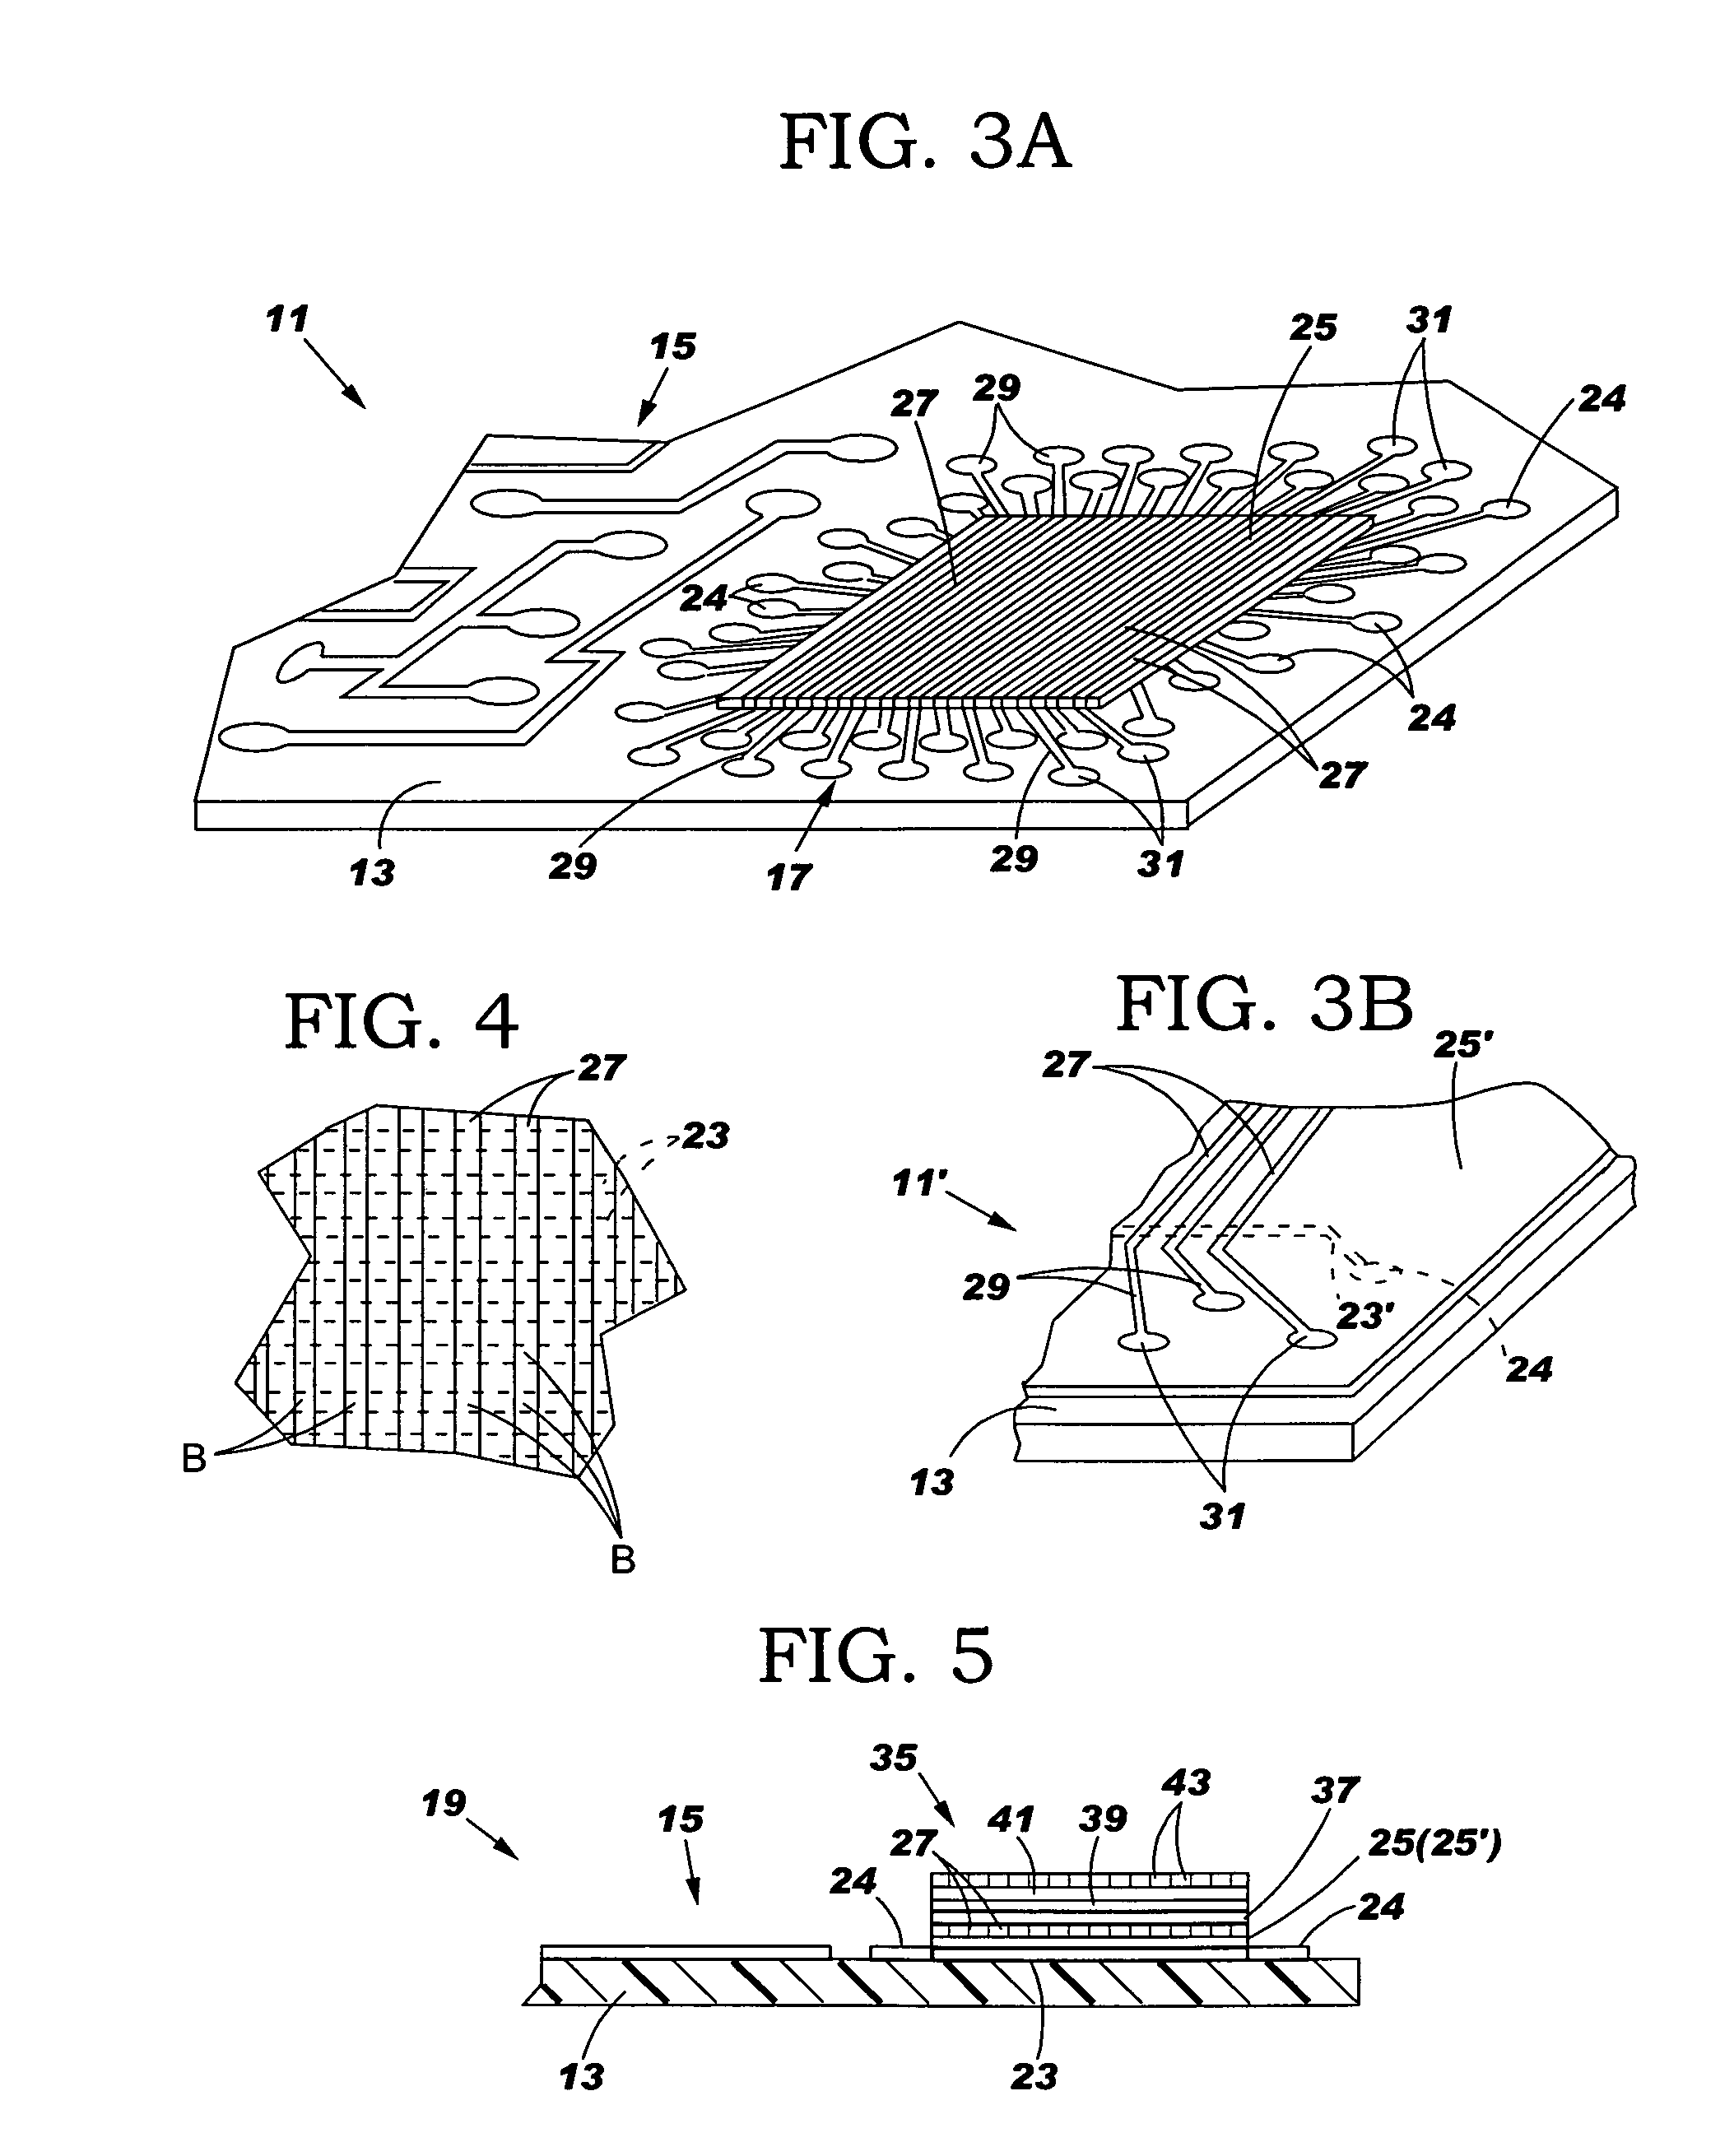 Circuitized substrate with internal organic memory device, method of making same, electrical assembly utilizing same, and information handling system utilizing same